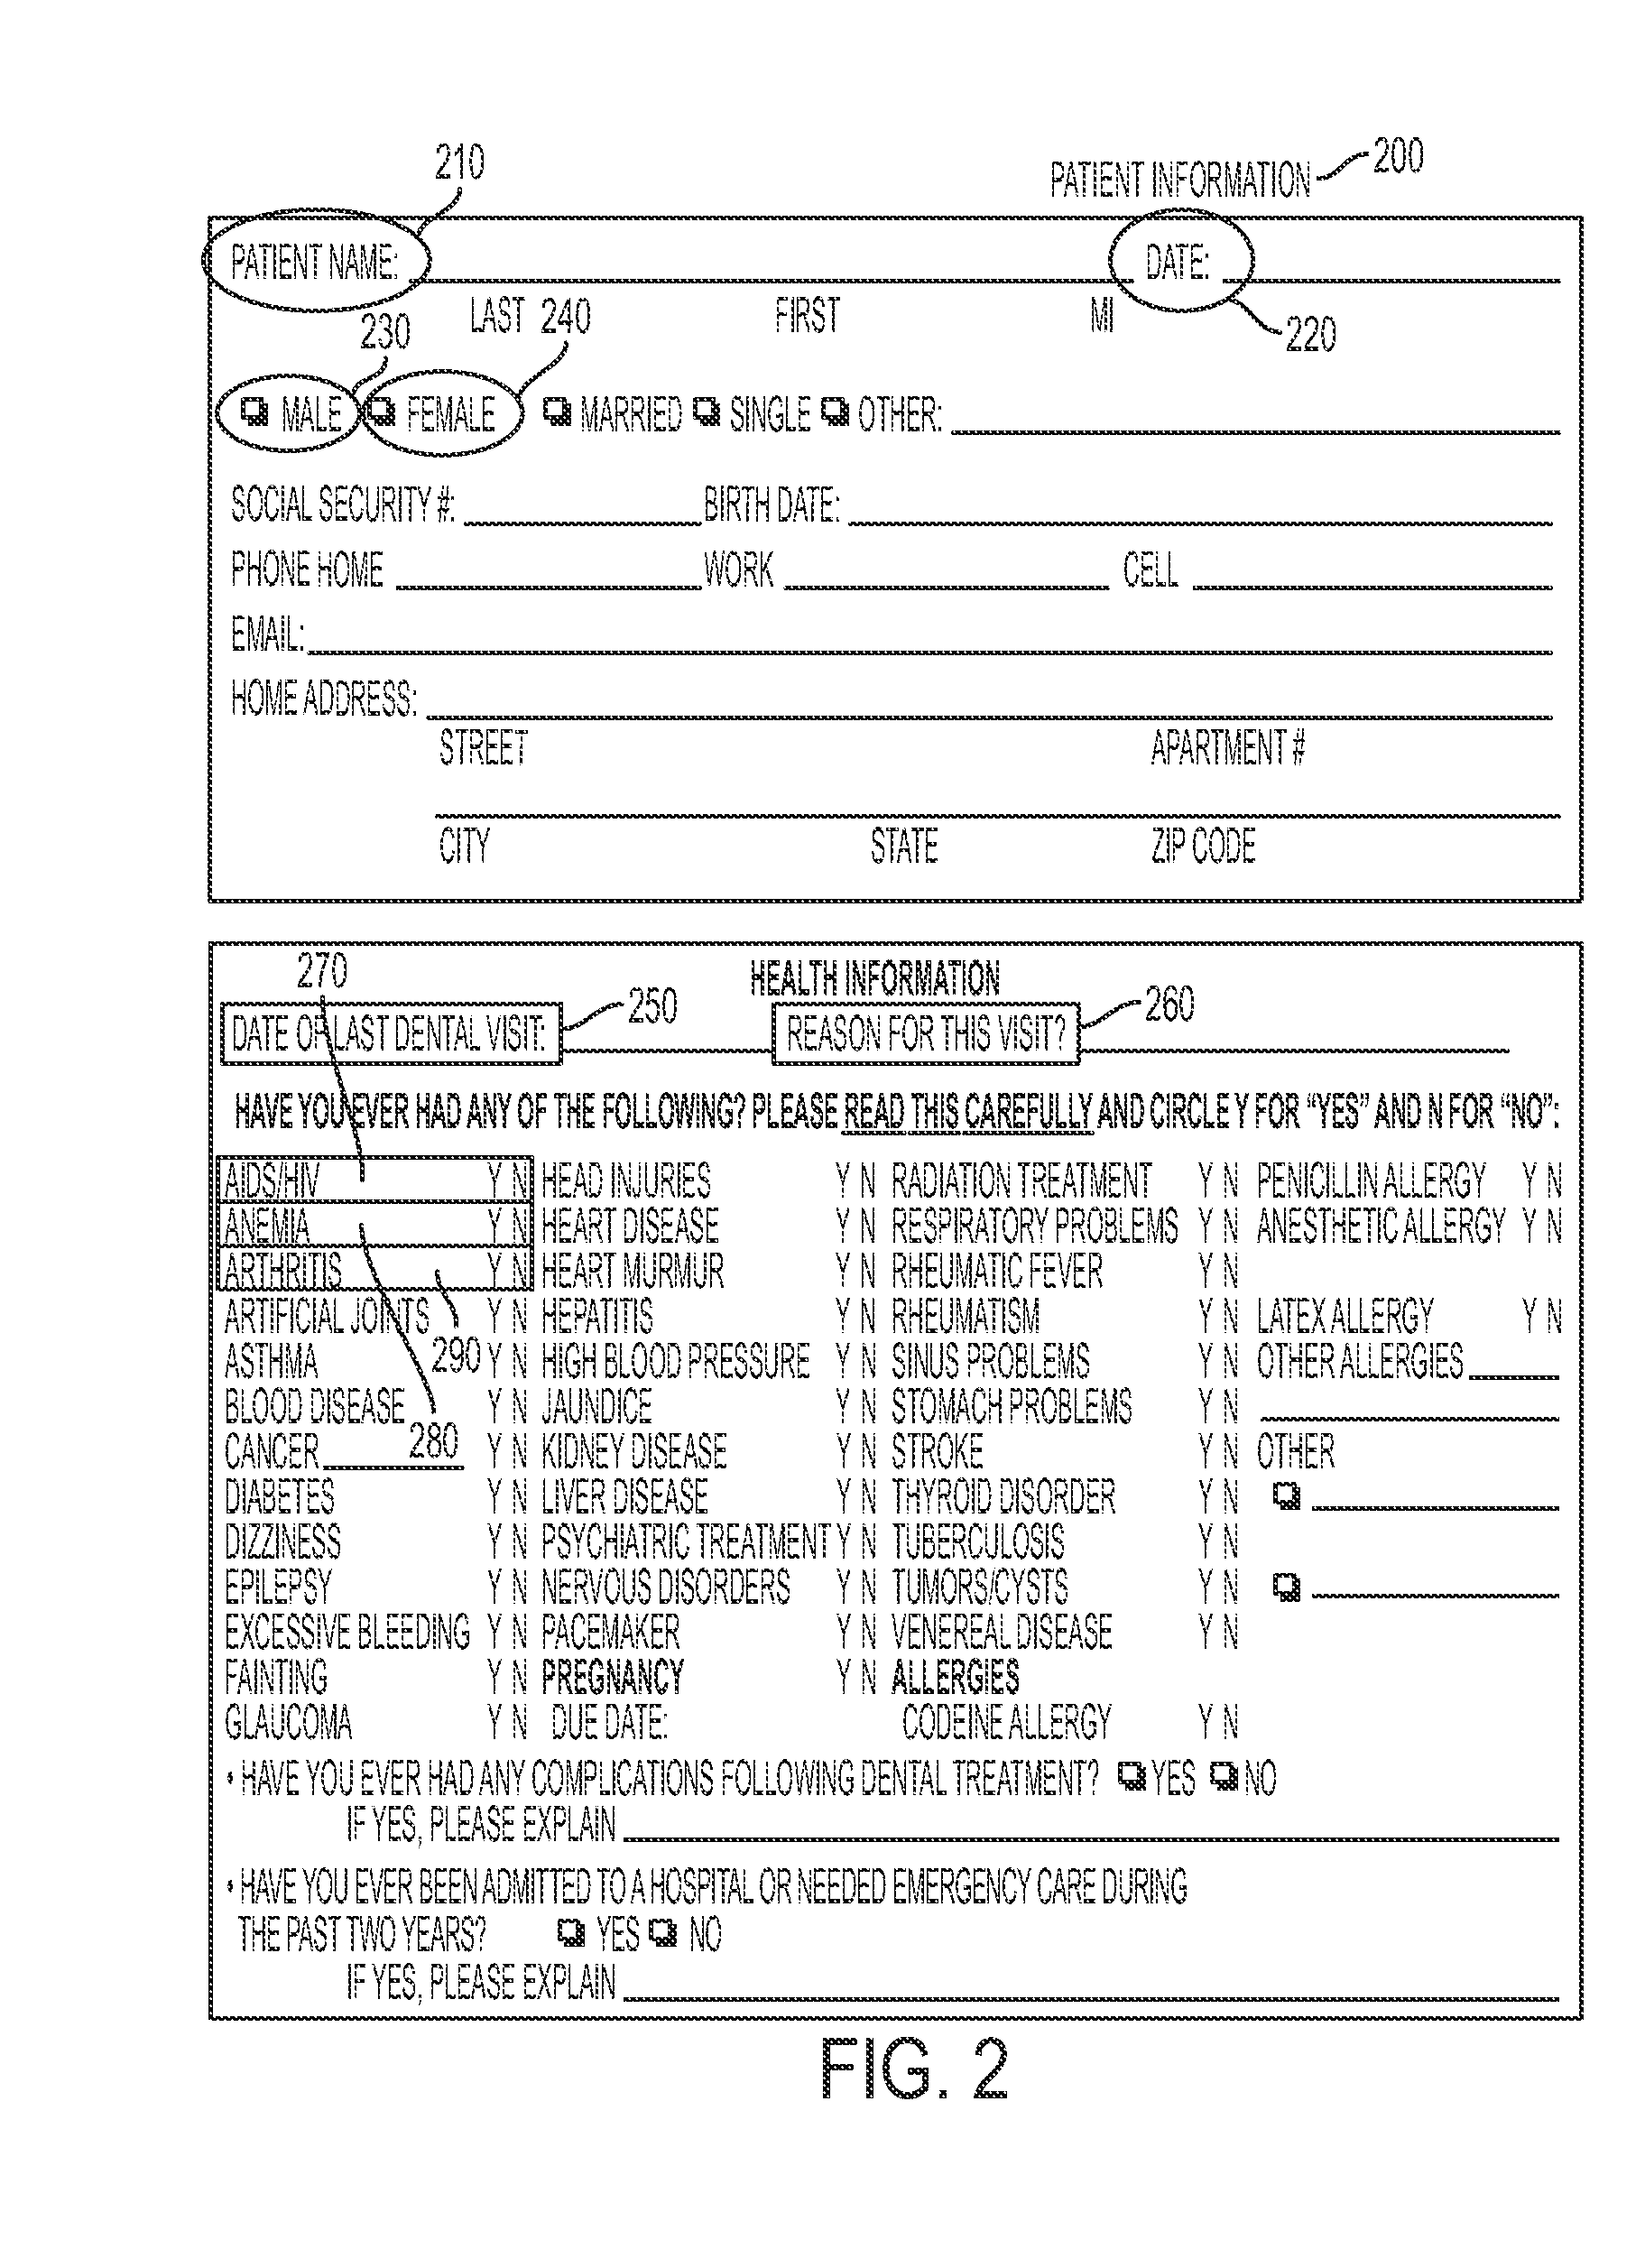 System for automatically filling in paper forms with electronic data